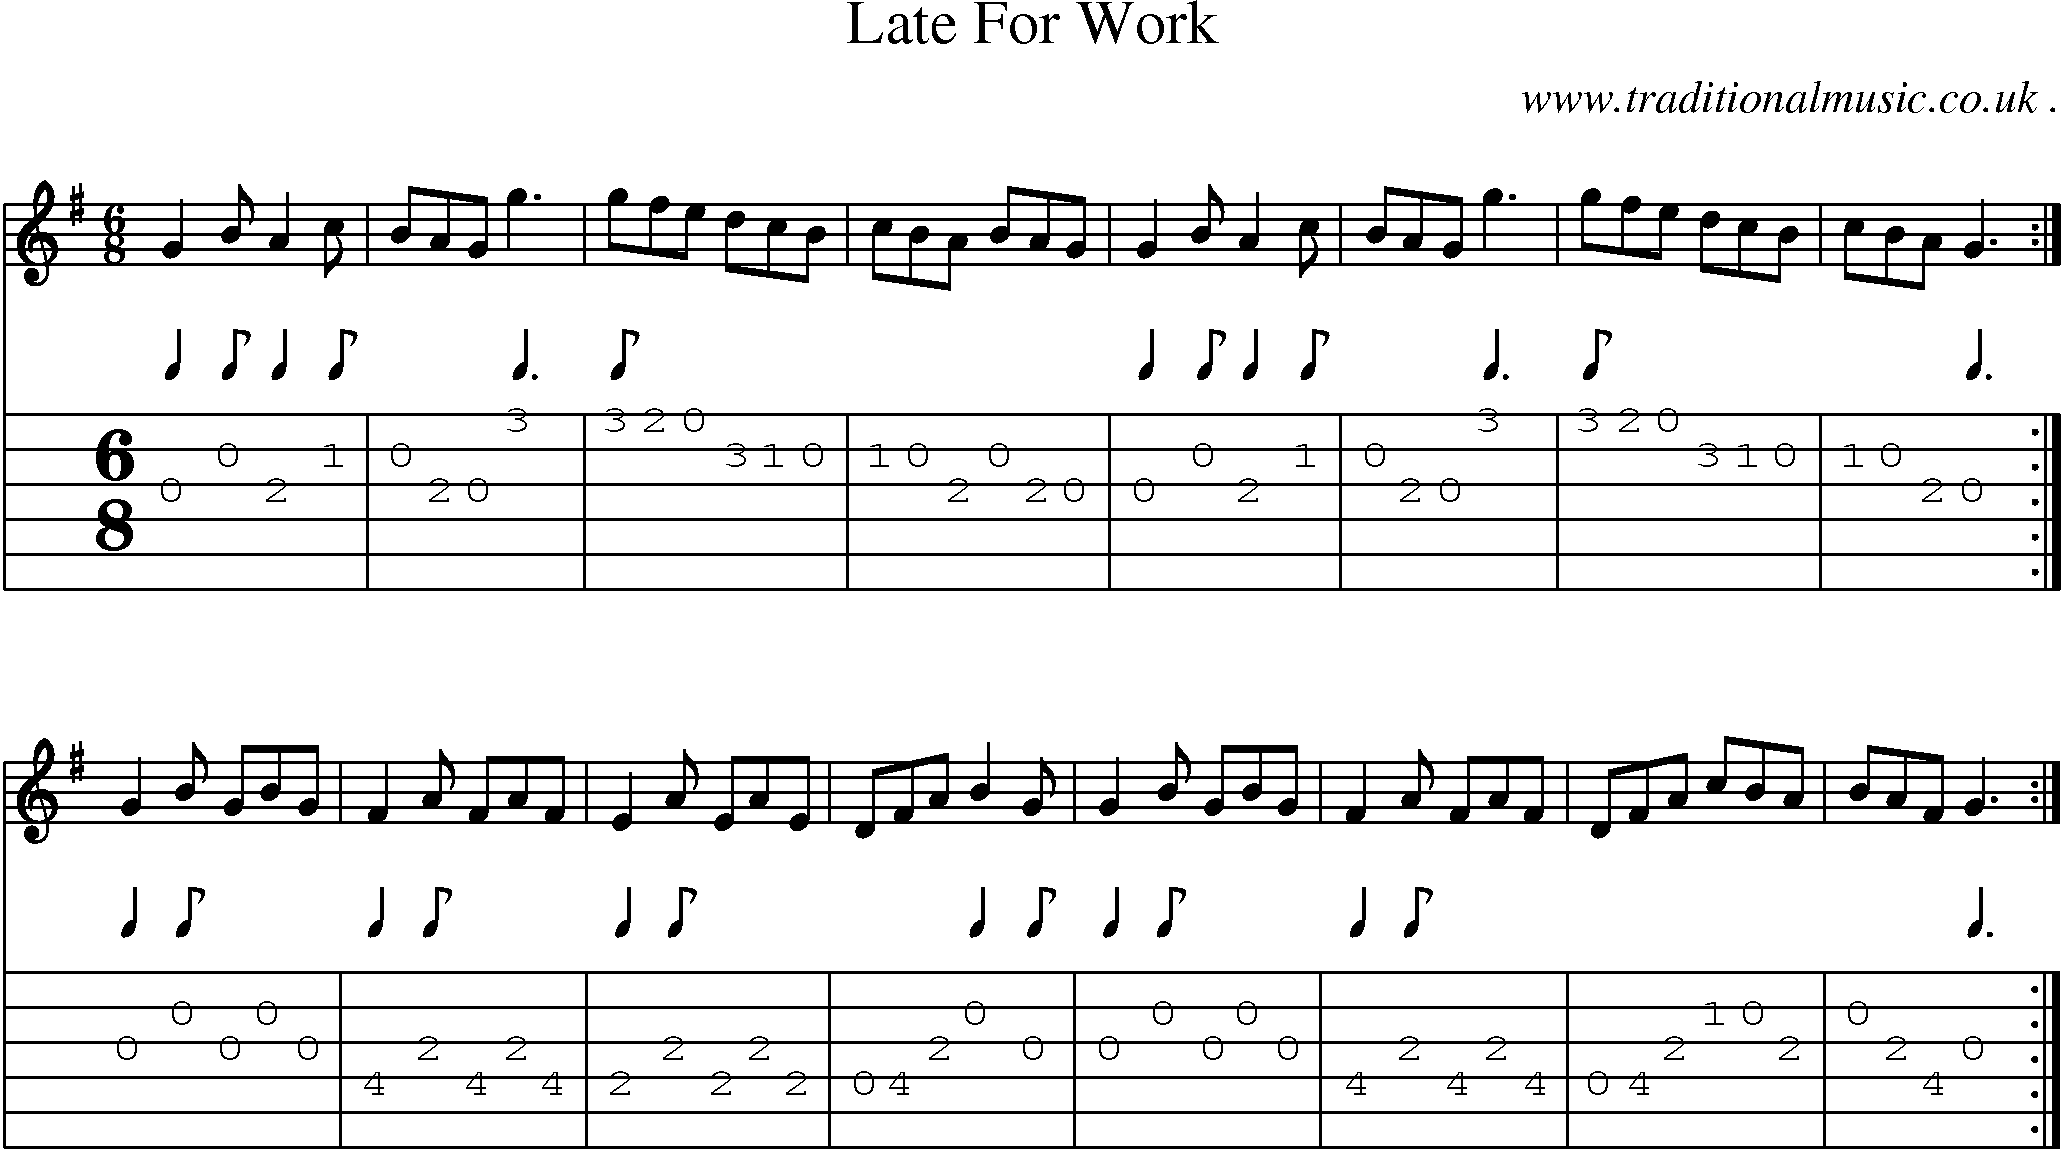 Sheet-Music and Guitar Tabs for Late For Work